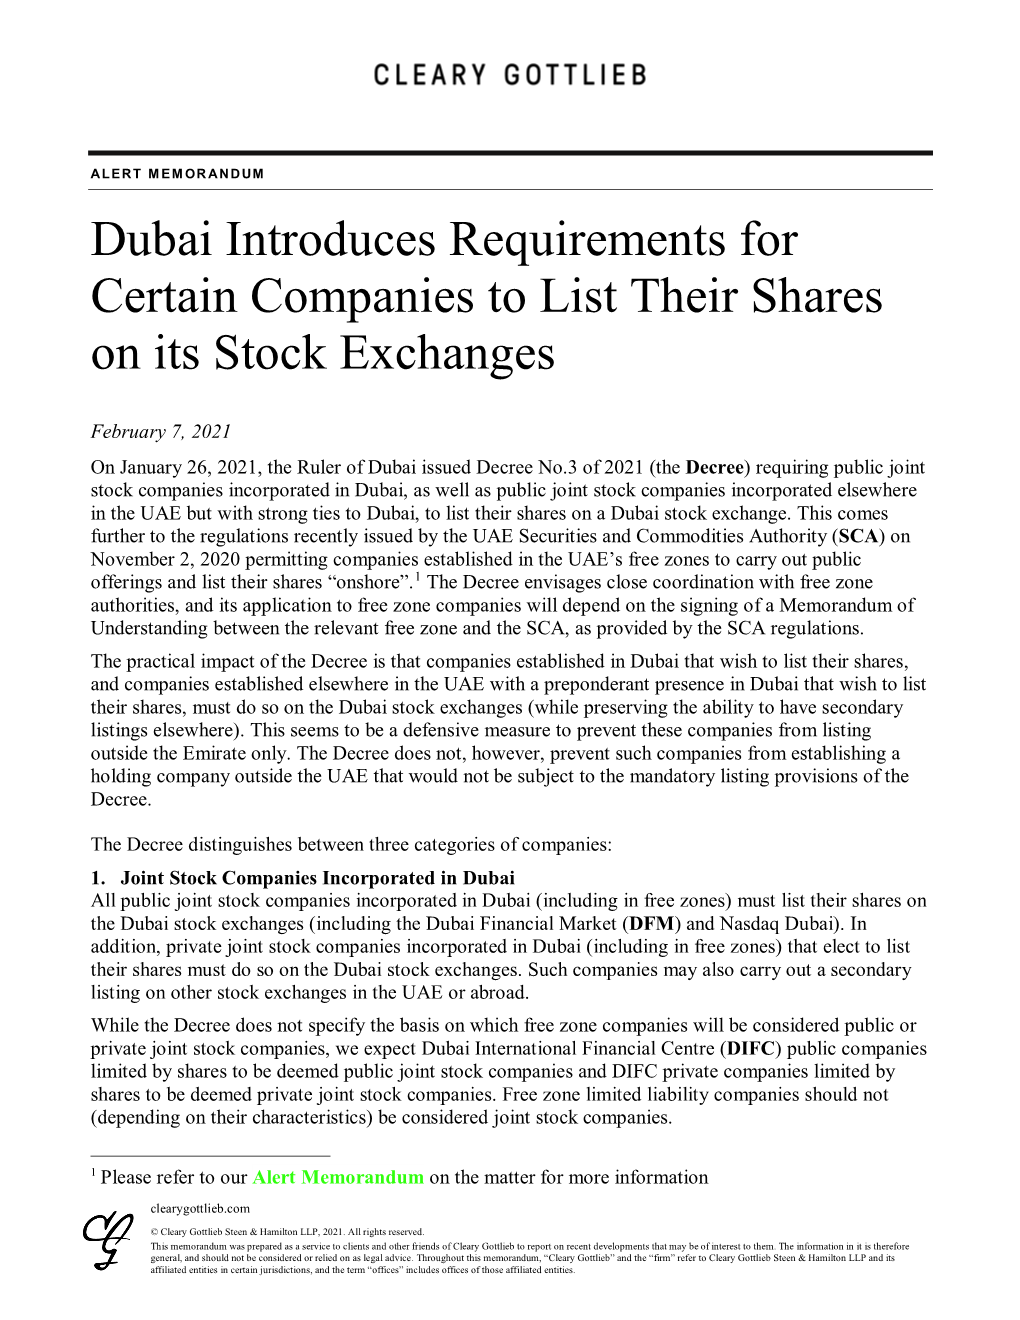 Dubai Introduces Requirements for Certain Companies to List Their Shares on Its Stock Exchanges